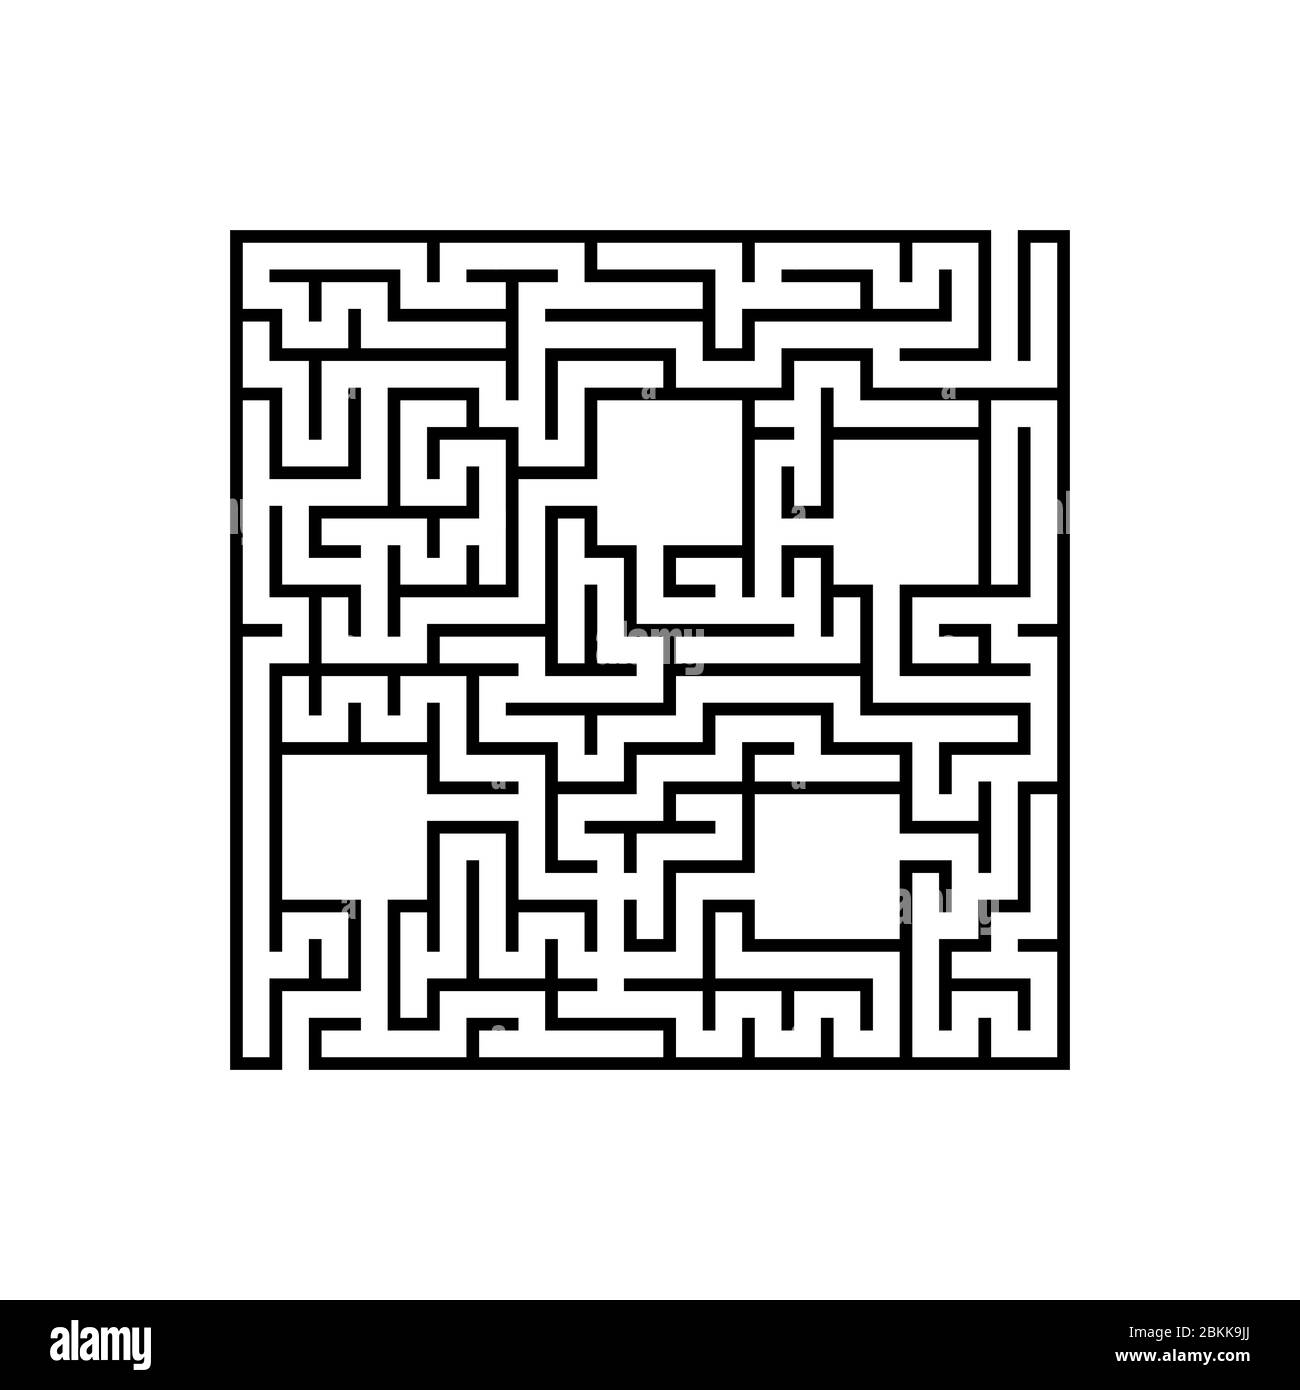 Abstact square labyrinth. Educational game for kids. Puzzle for children. Maze conundrum. Find the right path. Vector illustration. Stock Vector